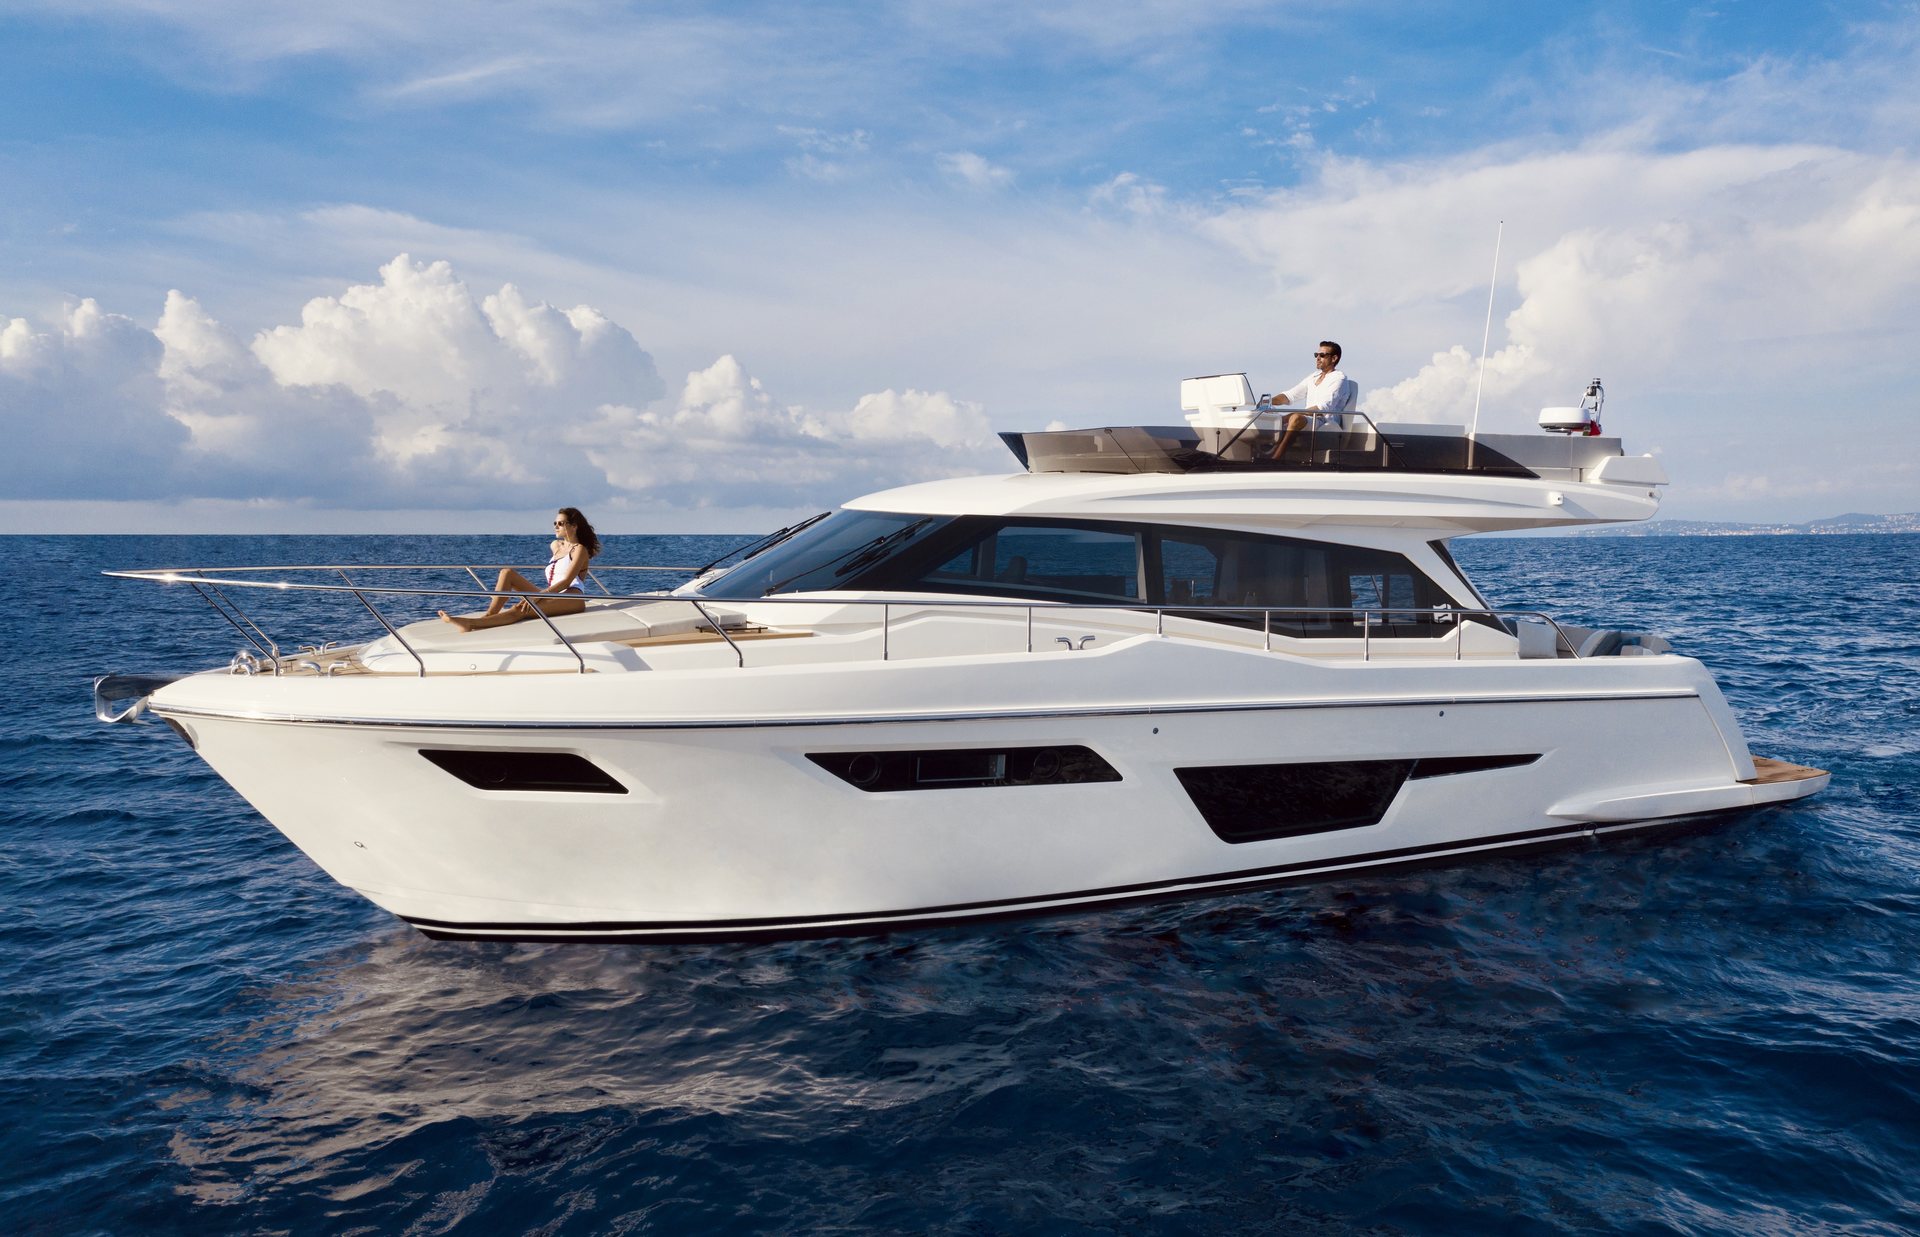 360 VR Virtual Tours of the Ferretti Yachts 500